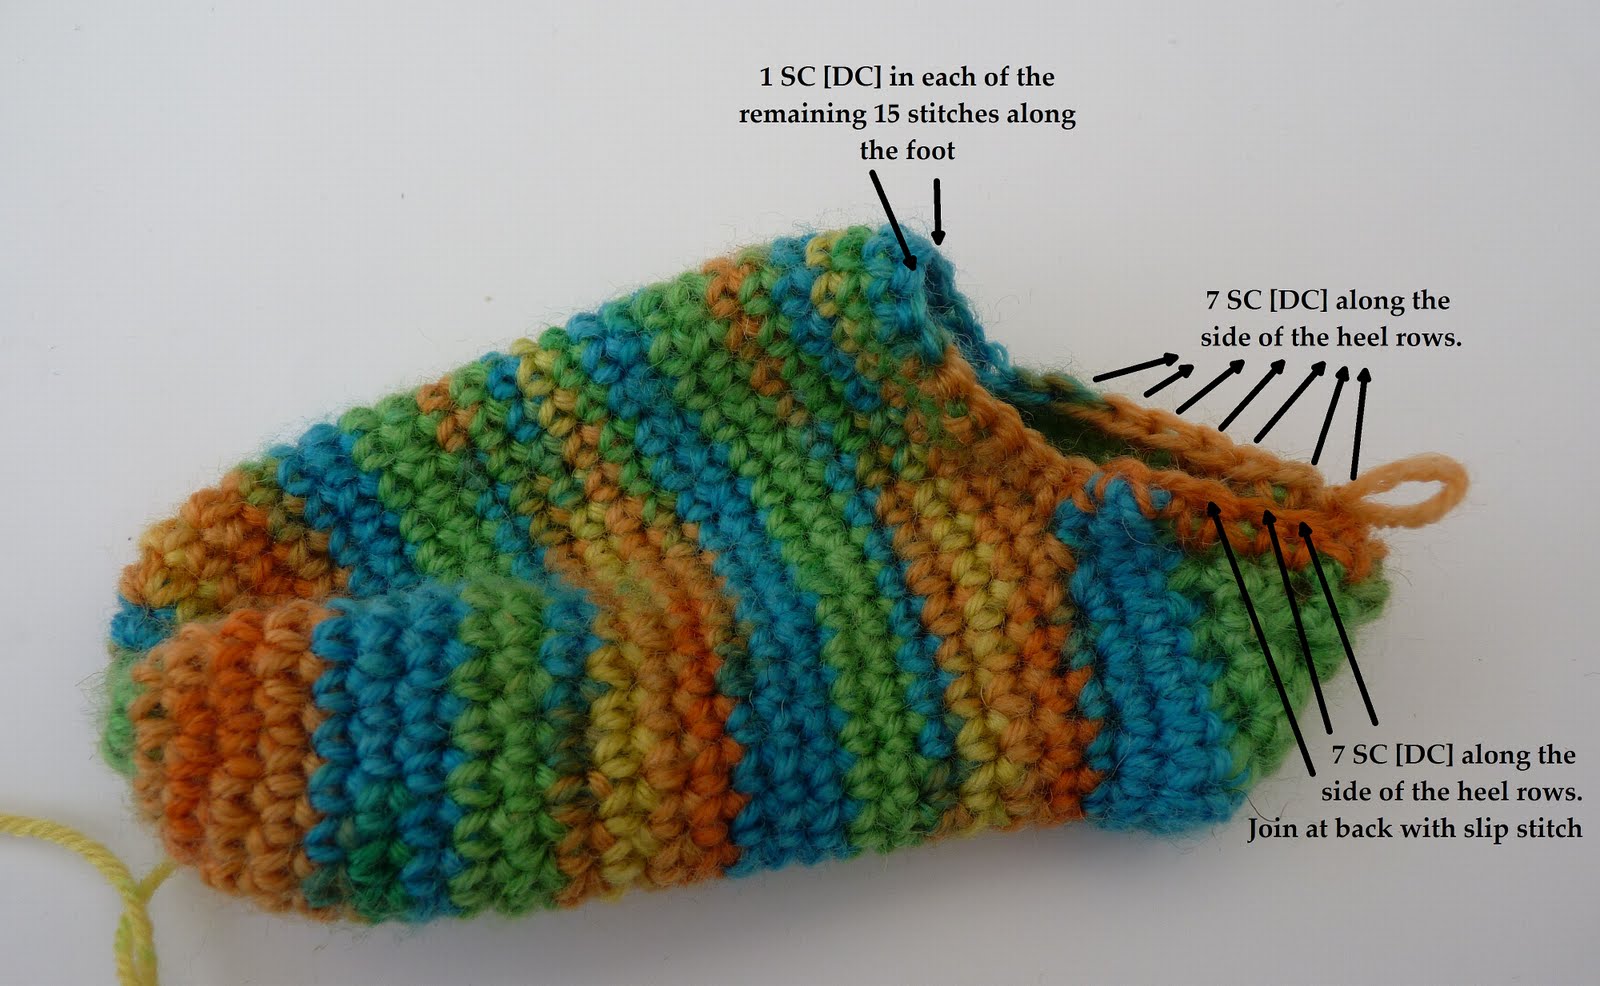 Knit and crochet sock patterns at Patternworks